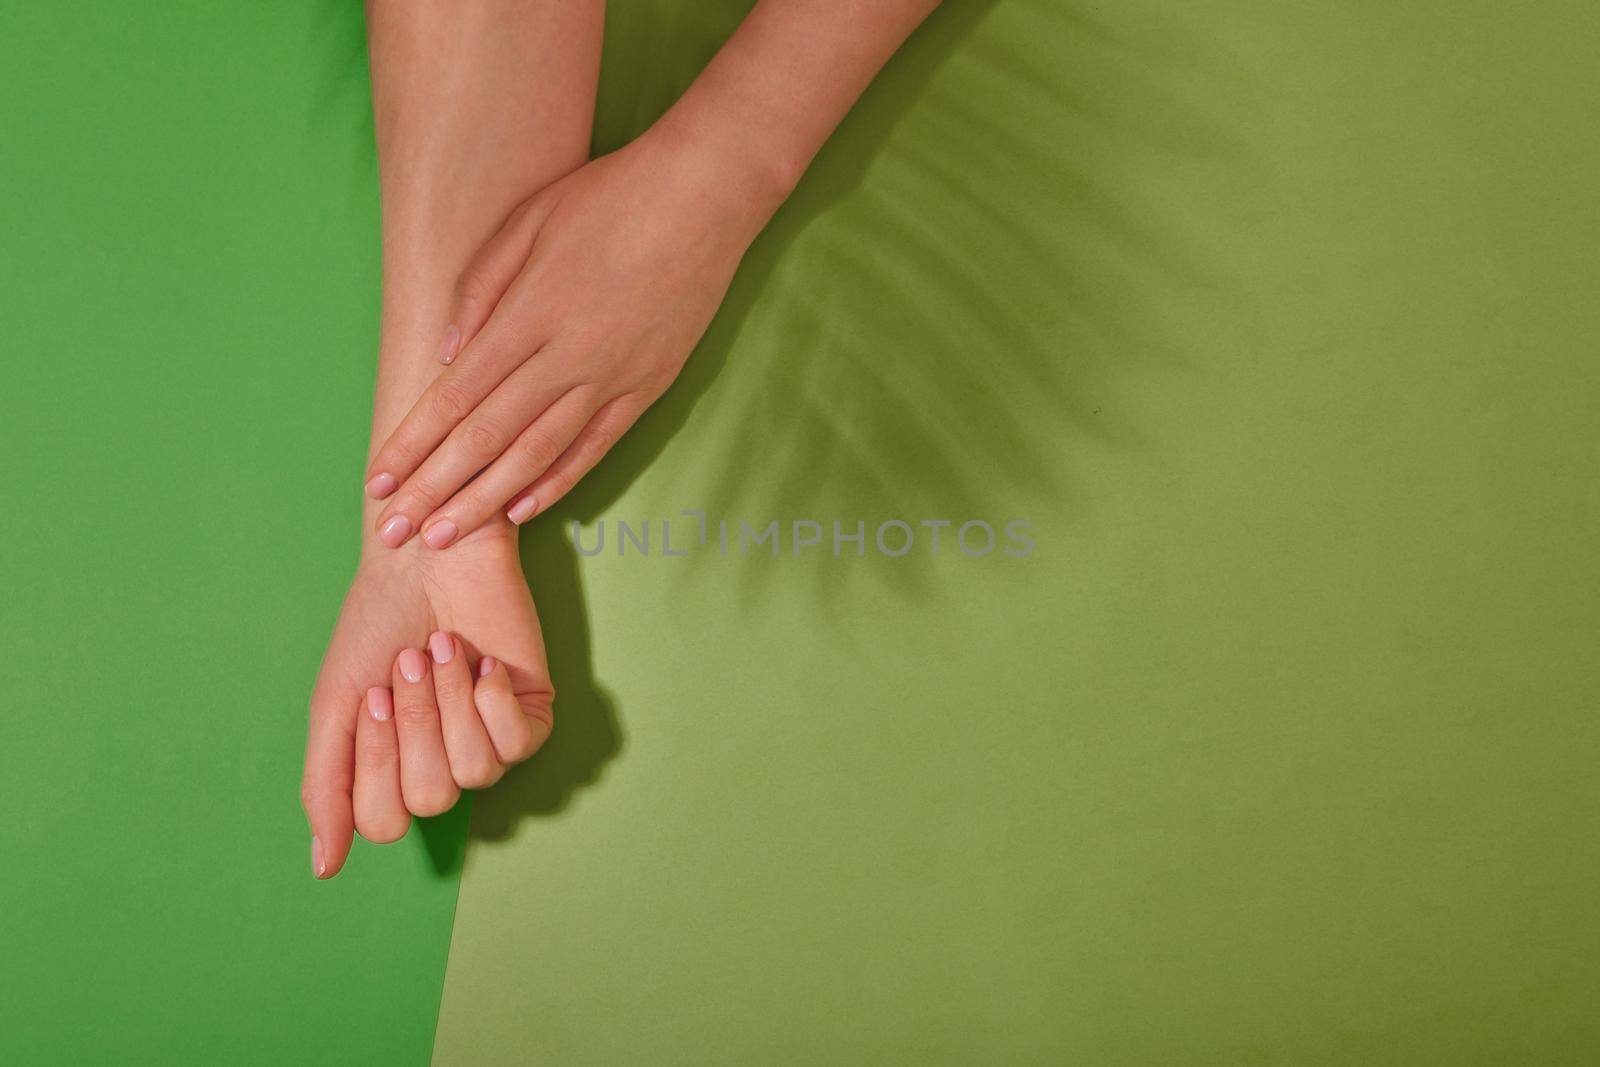 Hands with natural color manicure with shadow from a branch of fern planton green background